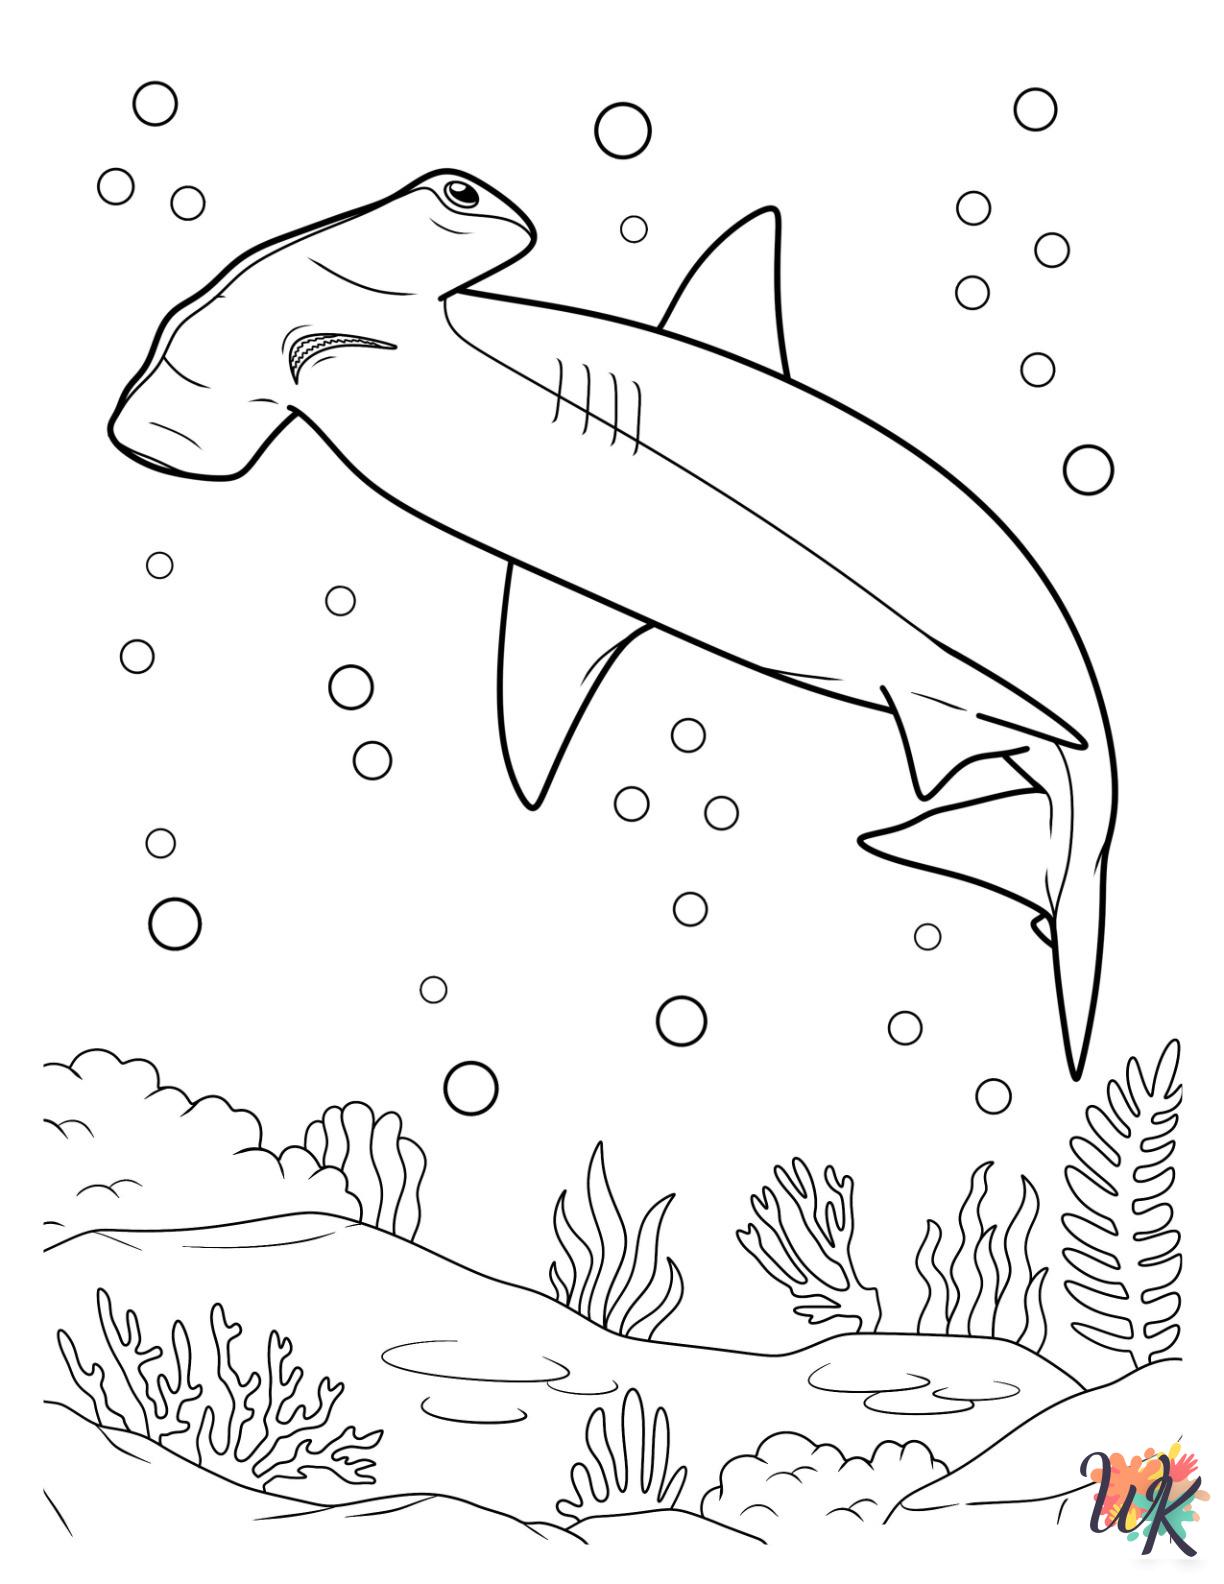 Hammerhead Shark coloring pages for adults